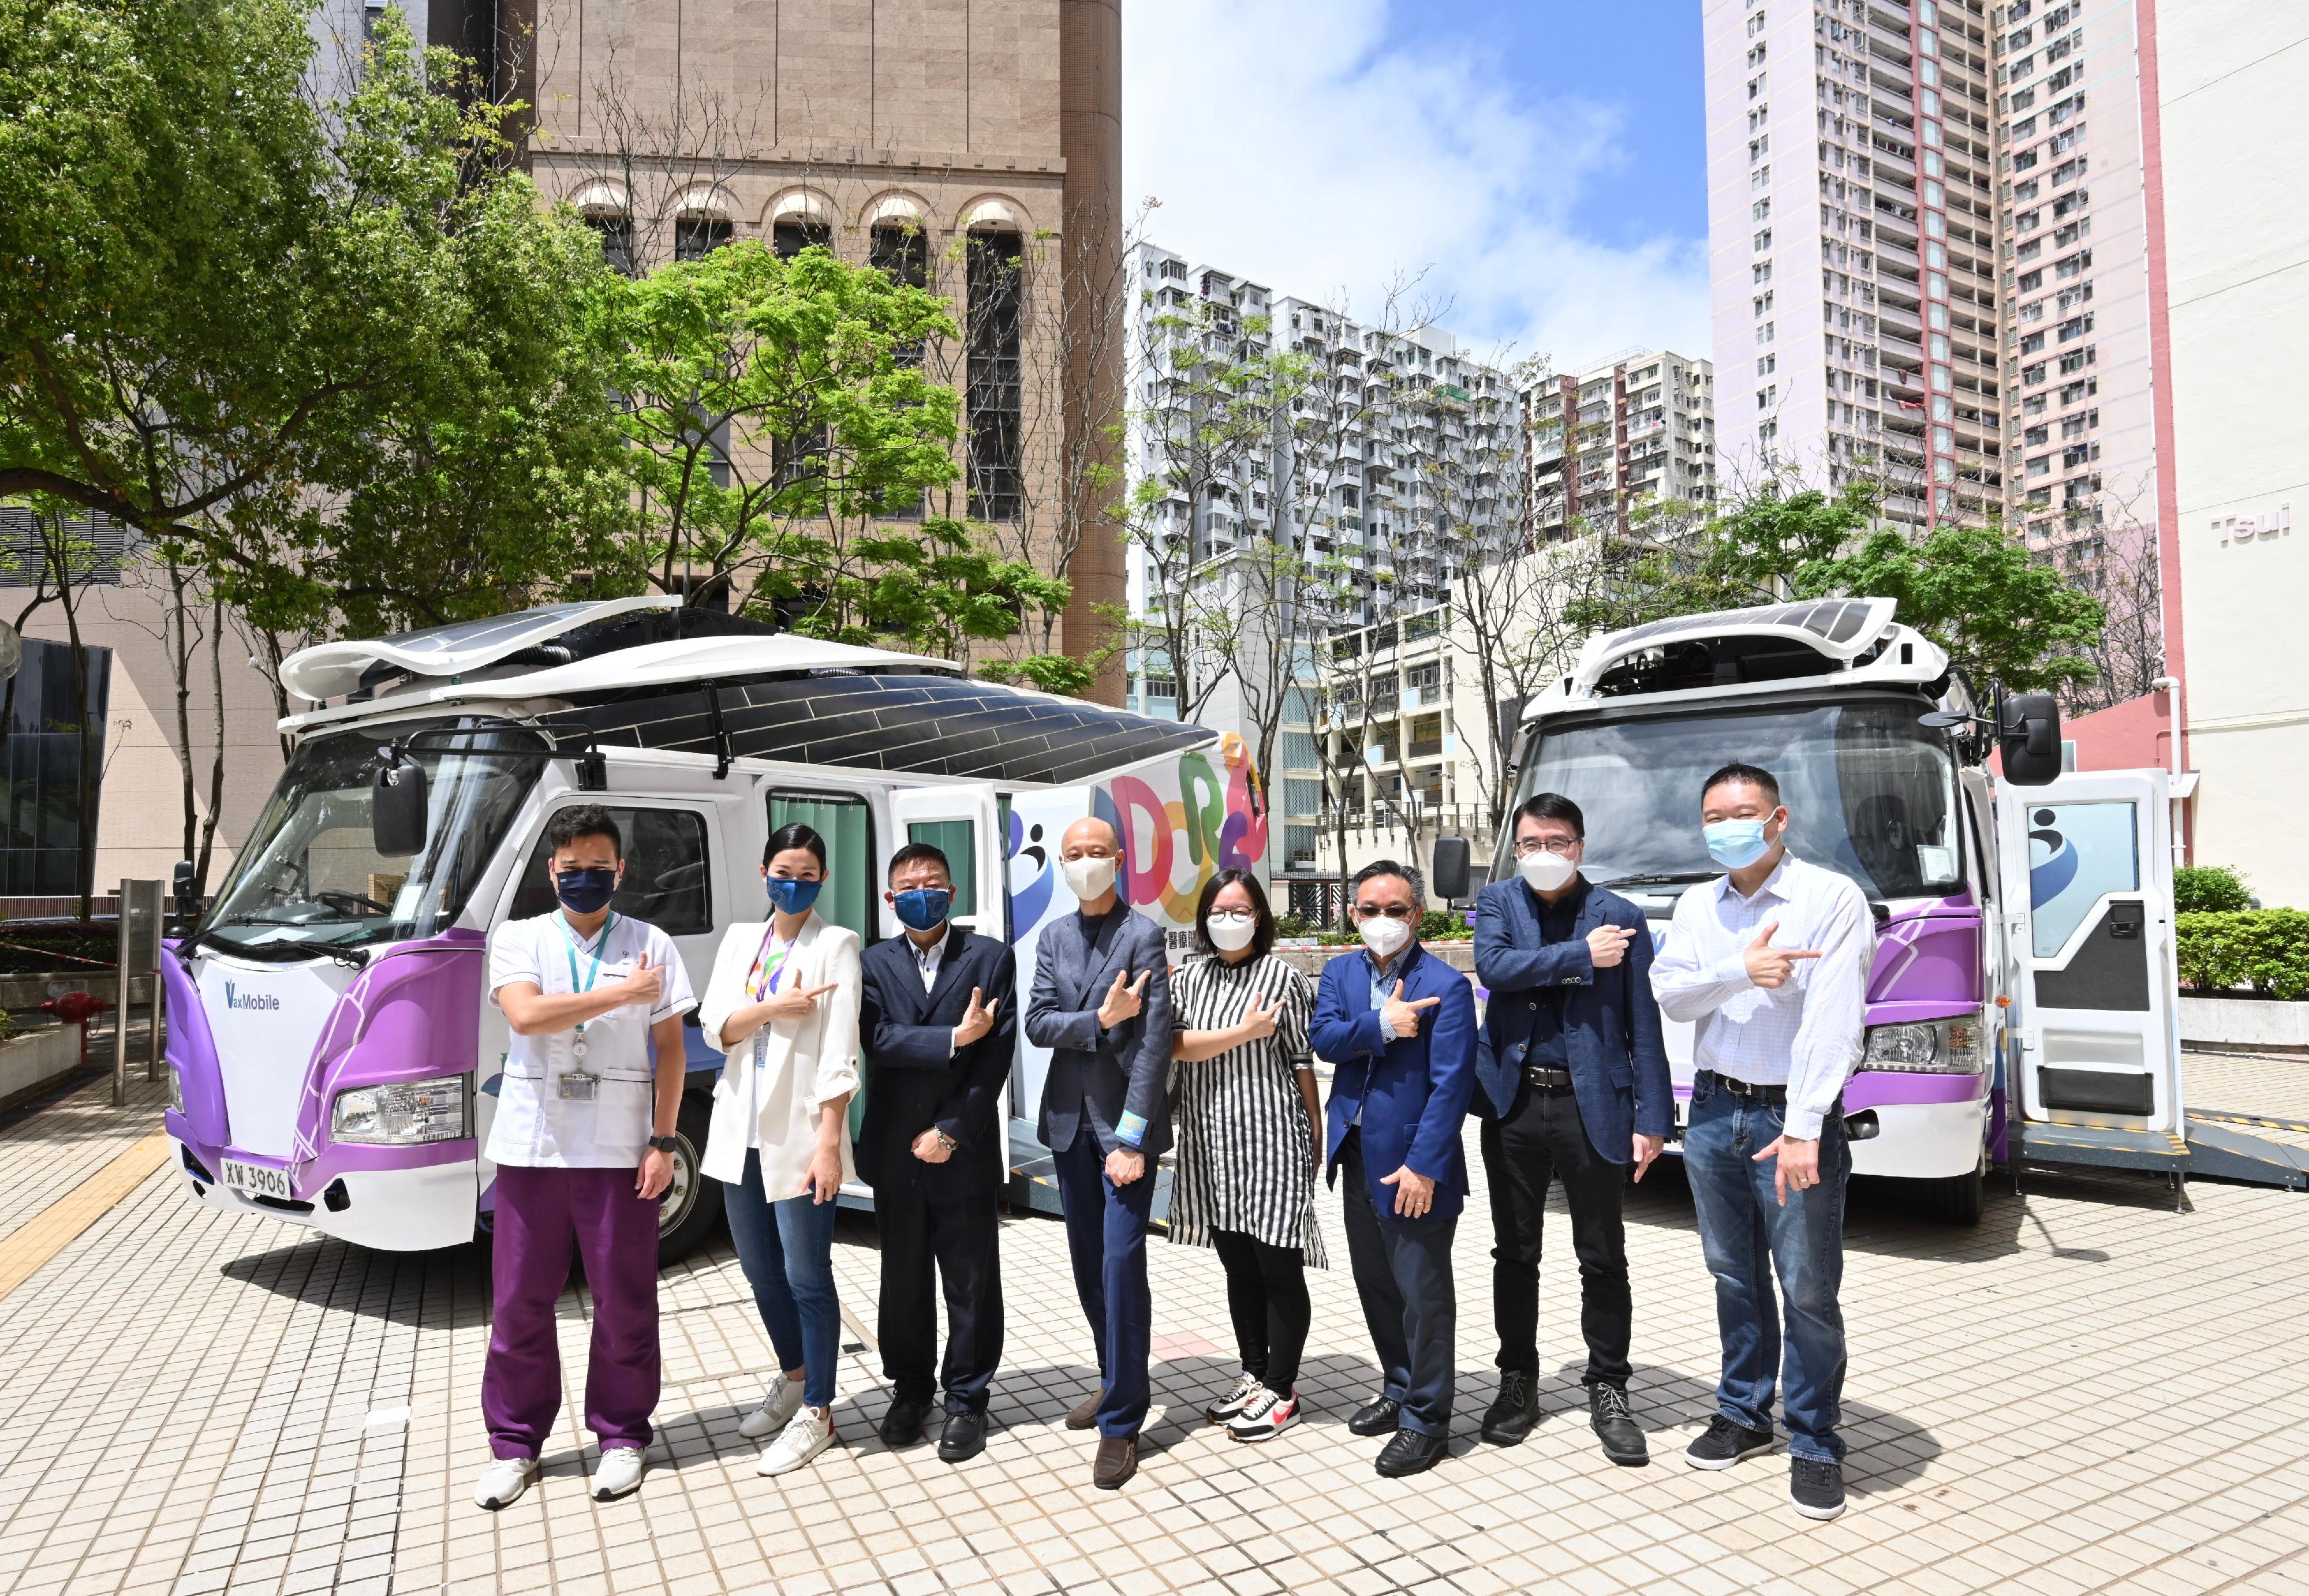 The Secretary for the Environment, Mr Wong Kam-sing, today (March 31) visited Tsui Ping Estate, Kwun Tong, to view the COVID-19 Mobile Vaccination Station (MVS) (Station No. 4) which operates in the form of an electric vaccination vehicle. Picture shows Mr Wong (fourth left); the Assistant Director of Environmental Protection (Air Policy), Dr Kenneth Leung (third right); the Chief Innovation Officer of the Hong Kong Productivity Council (HKPC) and the Chief Executive Officer of the Automotive Platforms and Application Systems R&D Centre (APAS) of the HKPC, Dr Lawrence Cheung (second right); the General Manager of the APAS of the HKPC, Mr Allan Lai (first right); and a representative of the medical team of the MVS, showing their support for the COVID-19 Vaccination Programme.